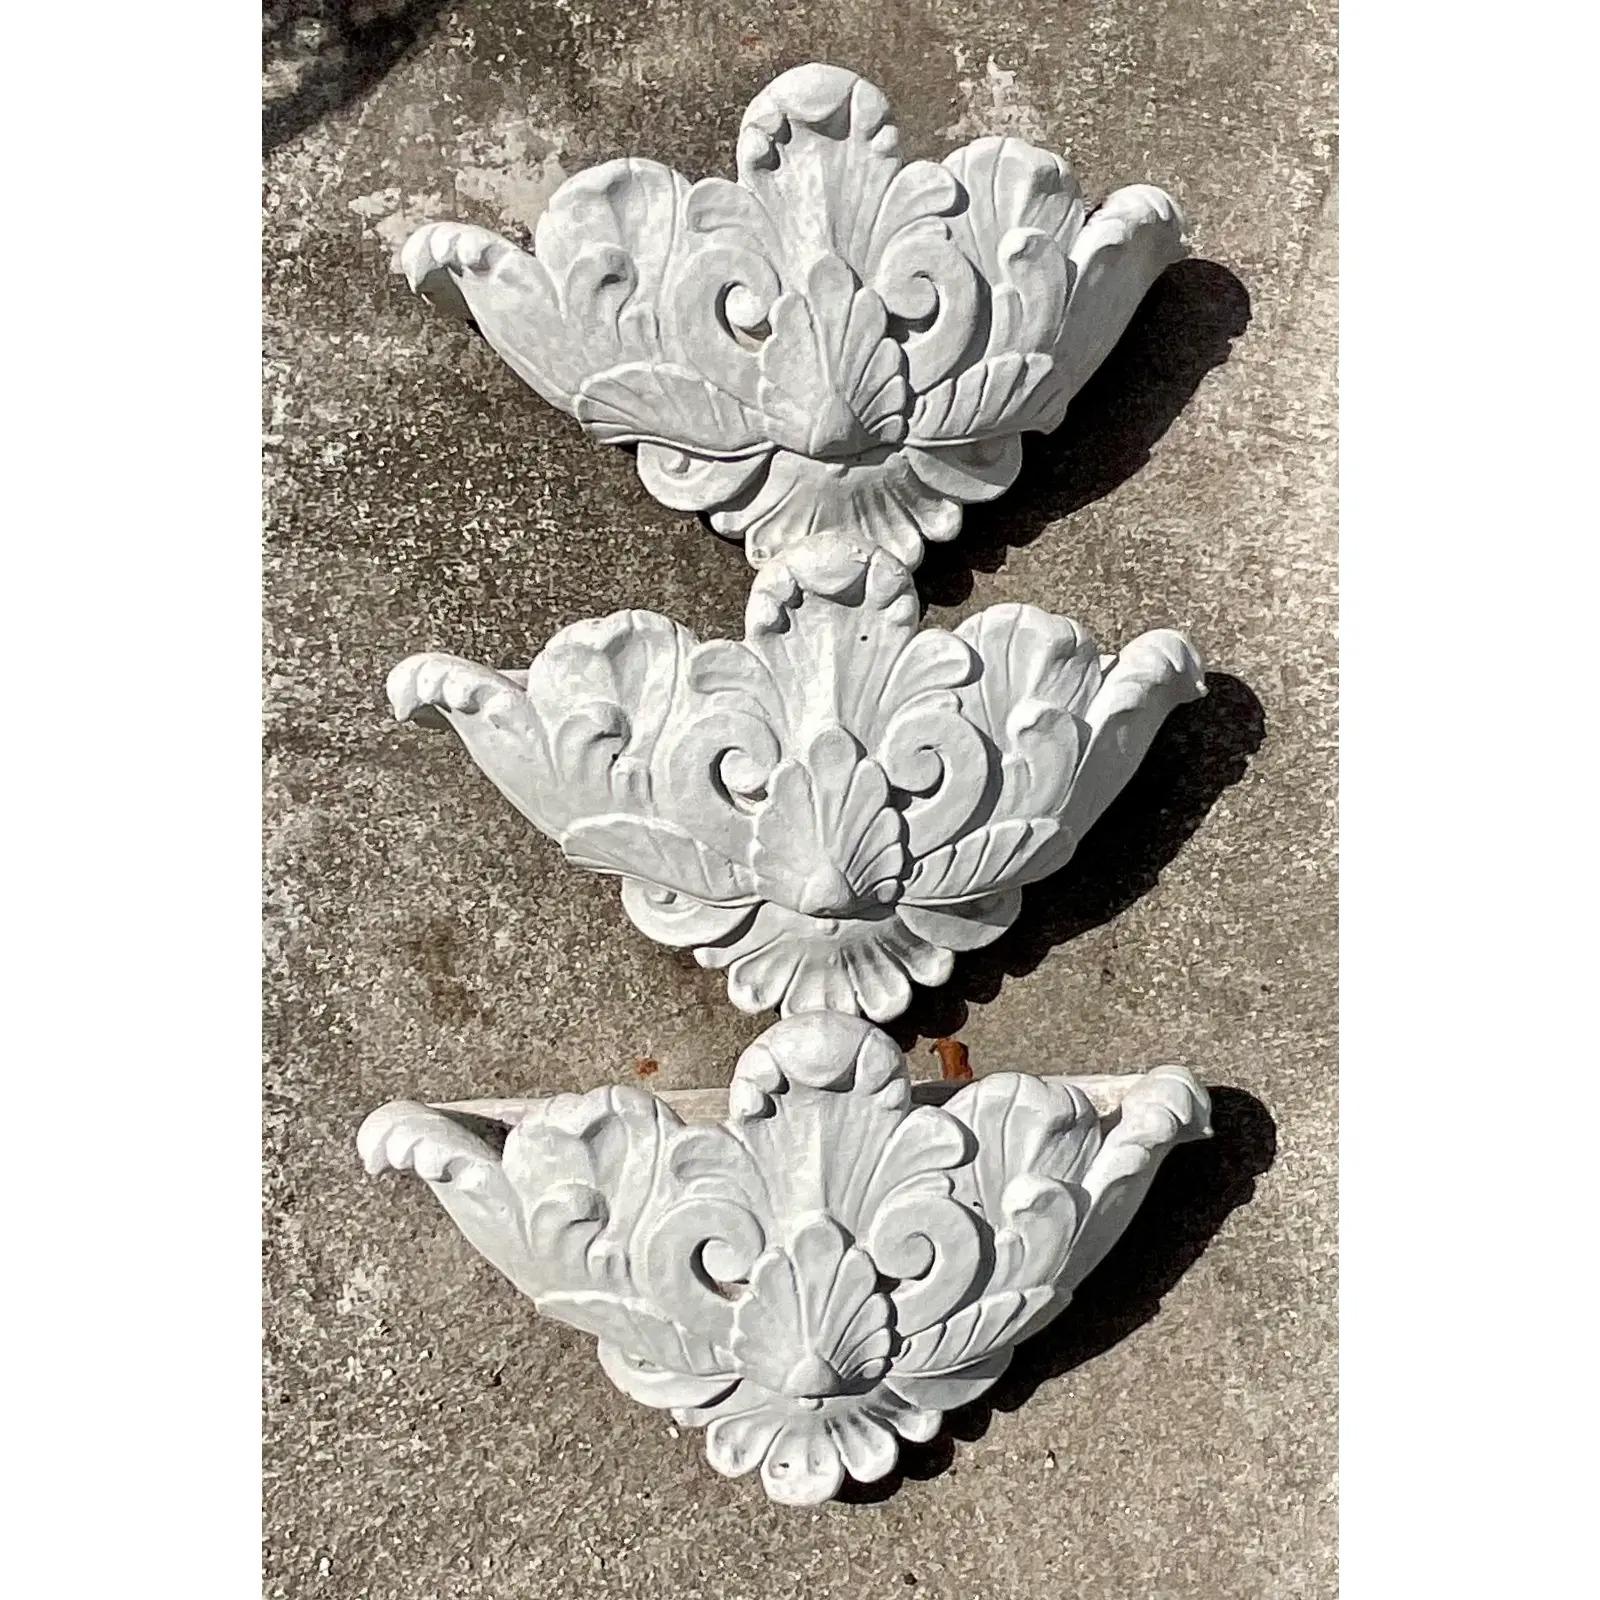 Vintage Garden Stone Wall Planters - Set of 3 In Good Condition For Sale In west palm beach, FL